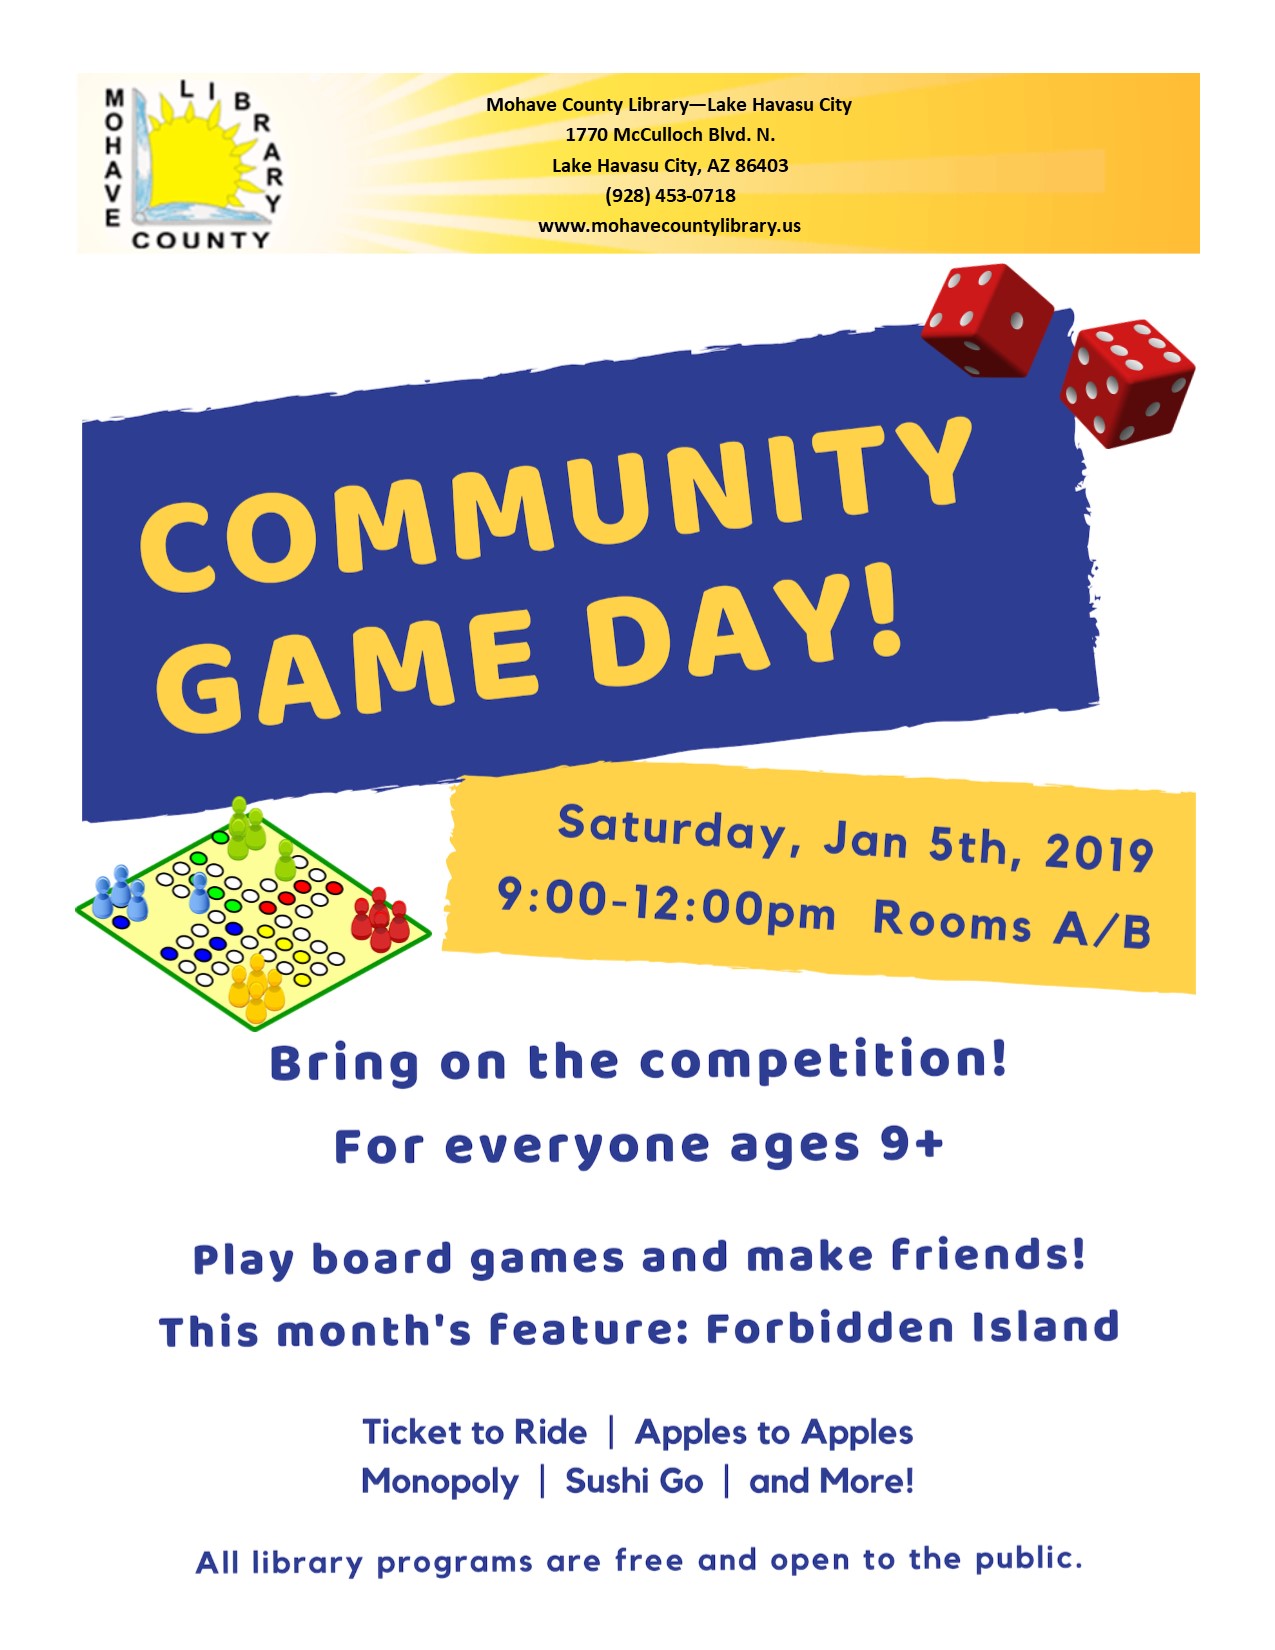 COMMUNITY GAME DAY